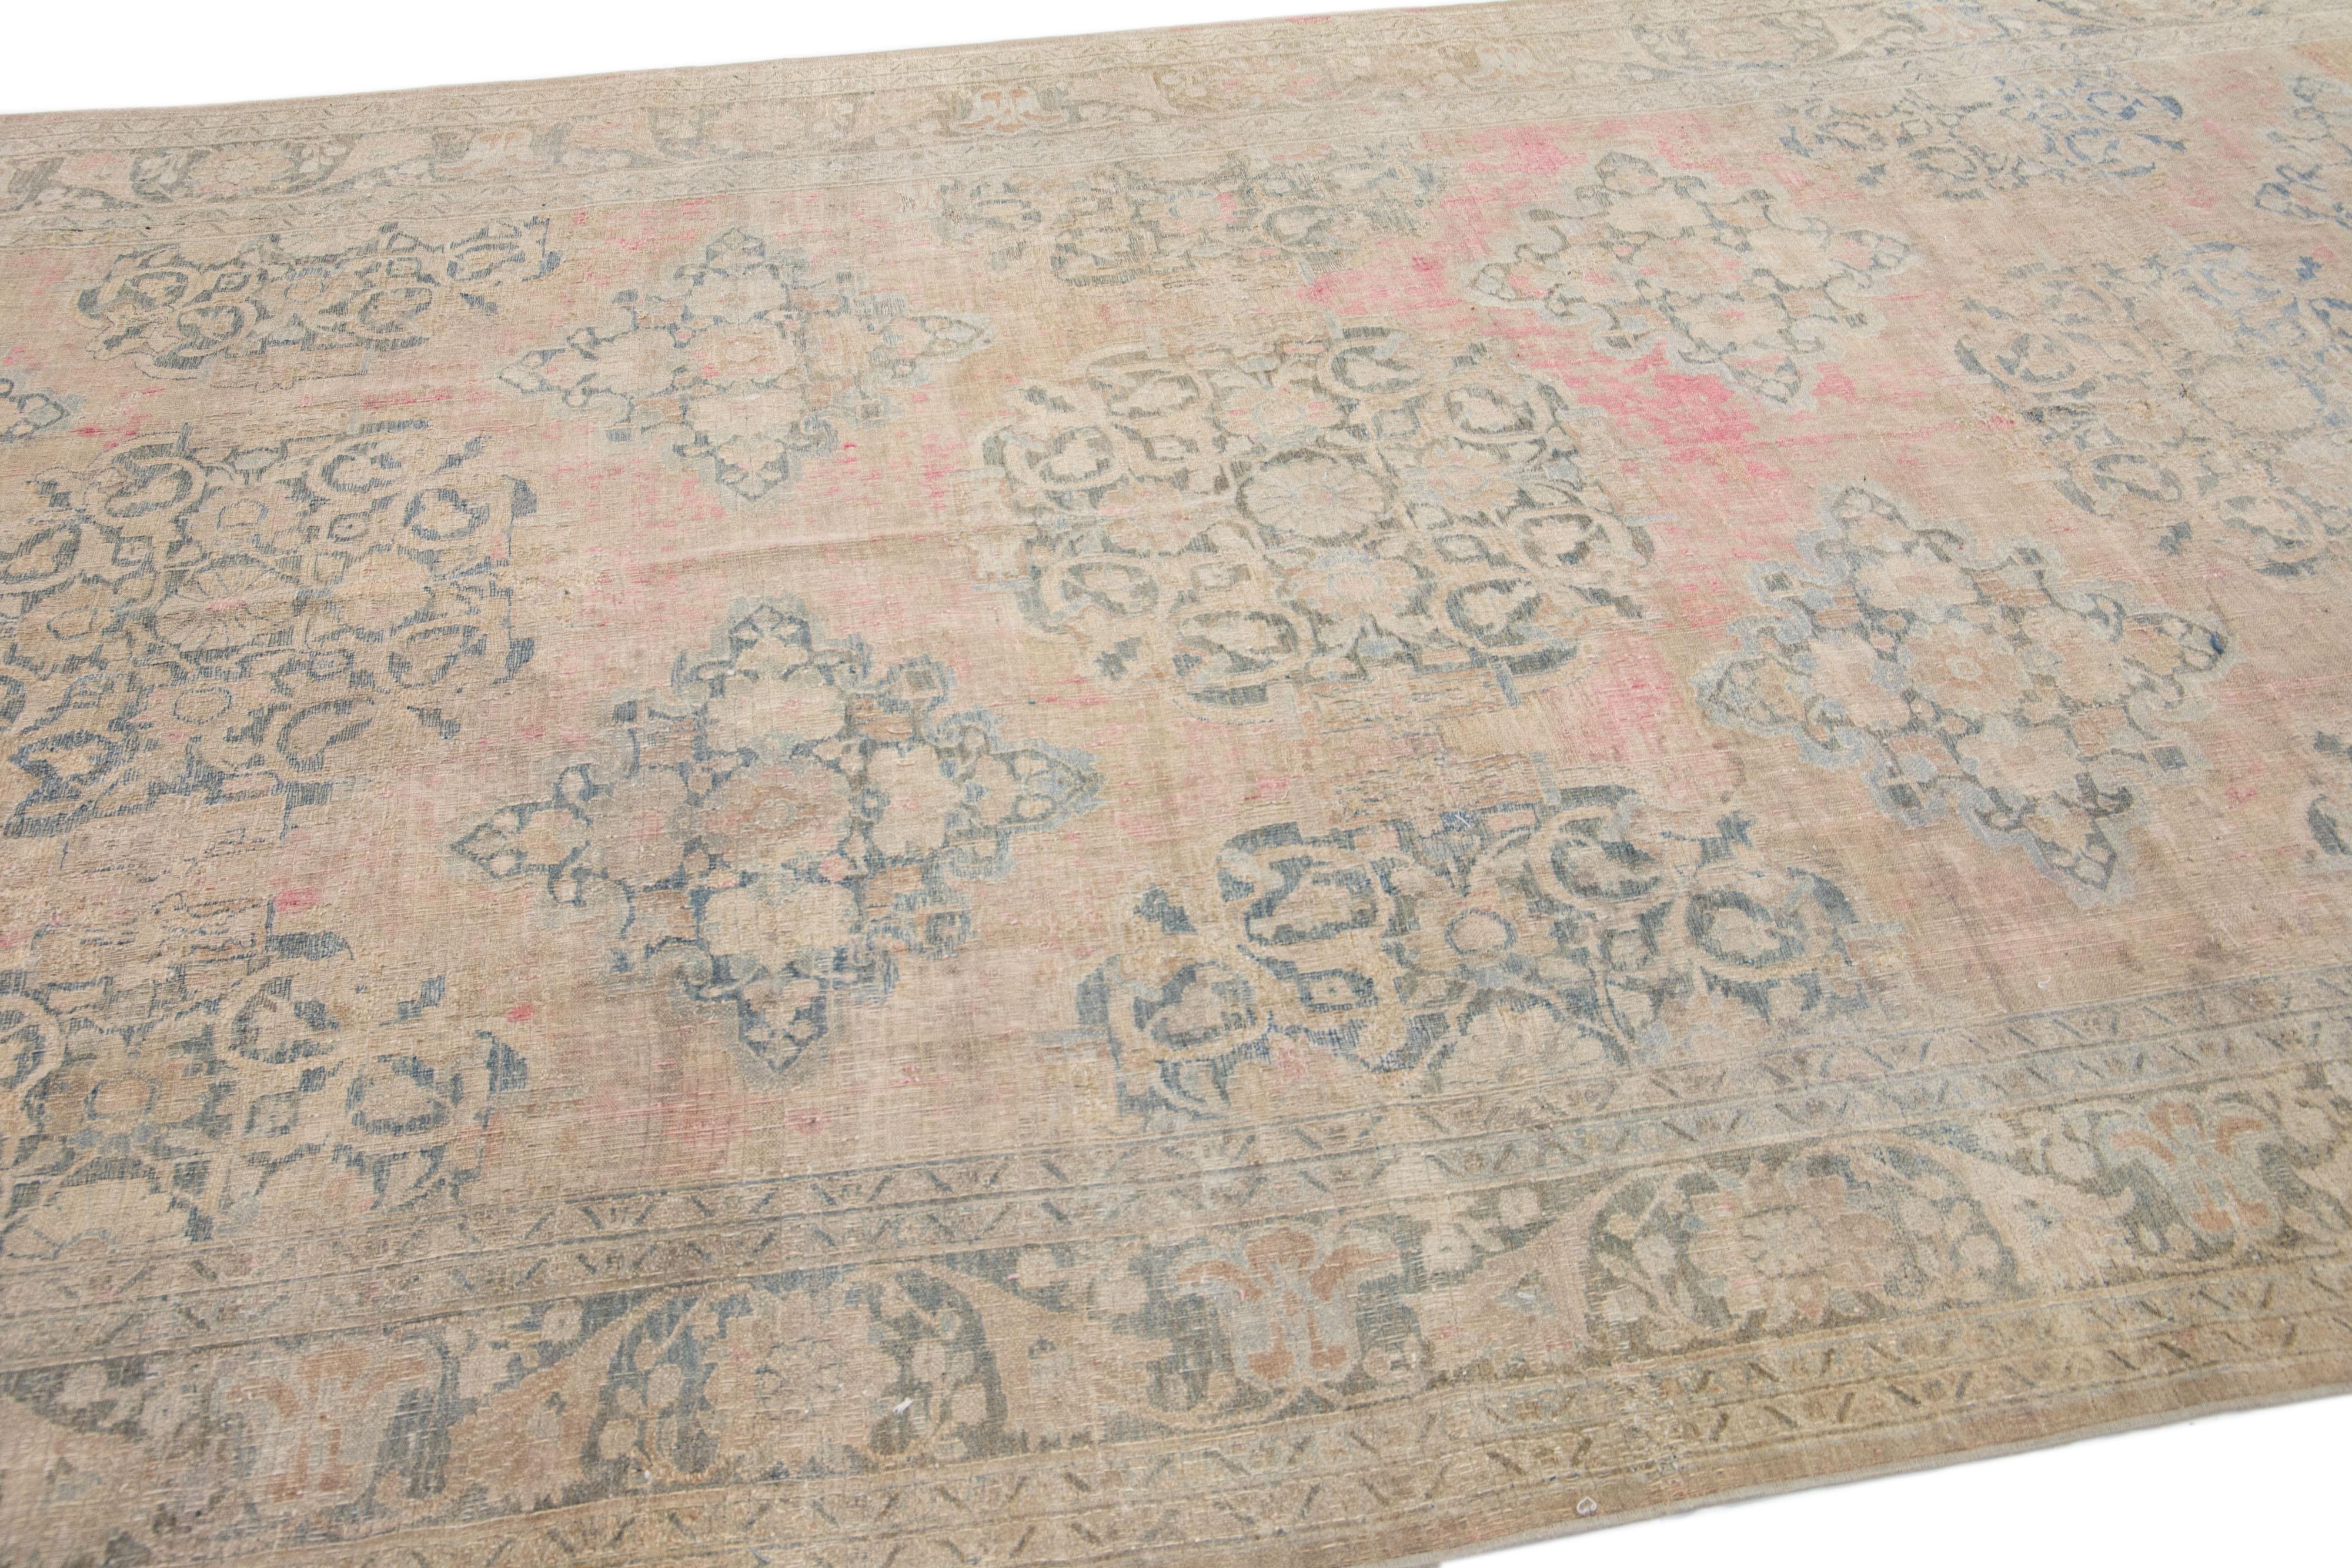 Antique Persian Doroksh Handmade Beige & Pink Wool Rug with Floral Pattern In Good Condition For Sale In Norwalk, CT